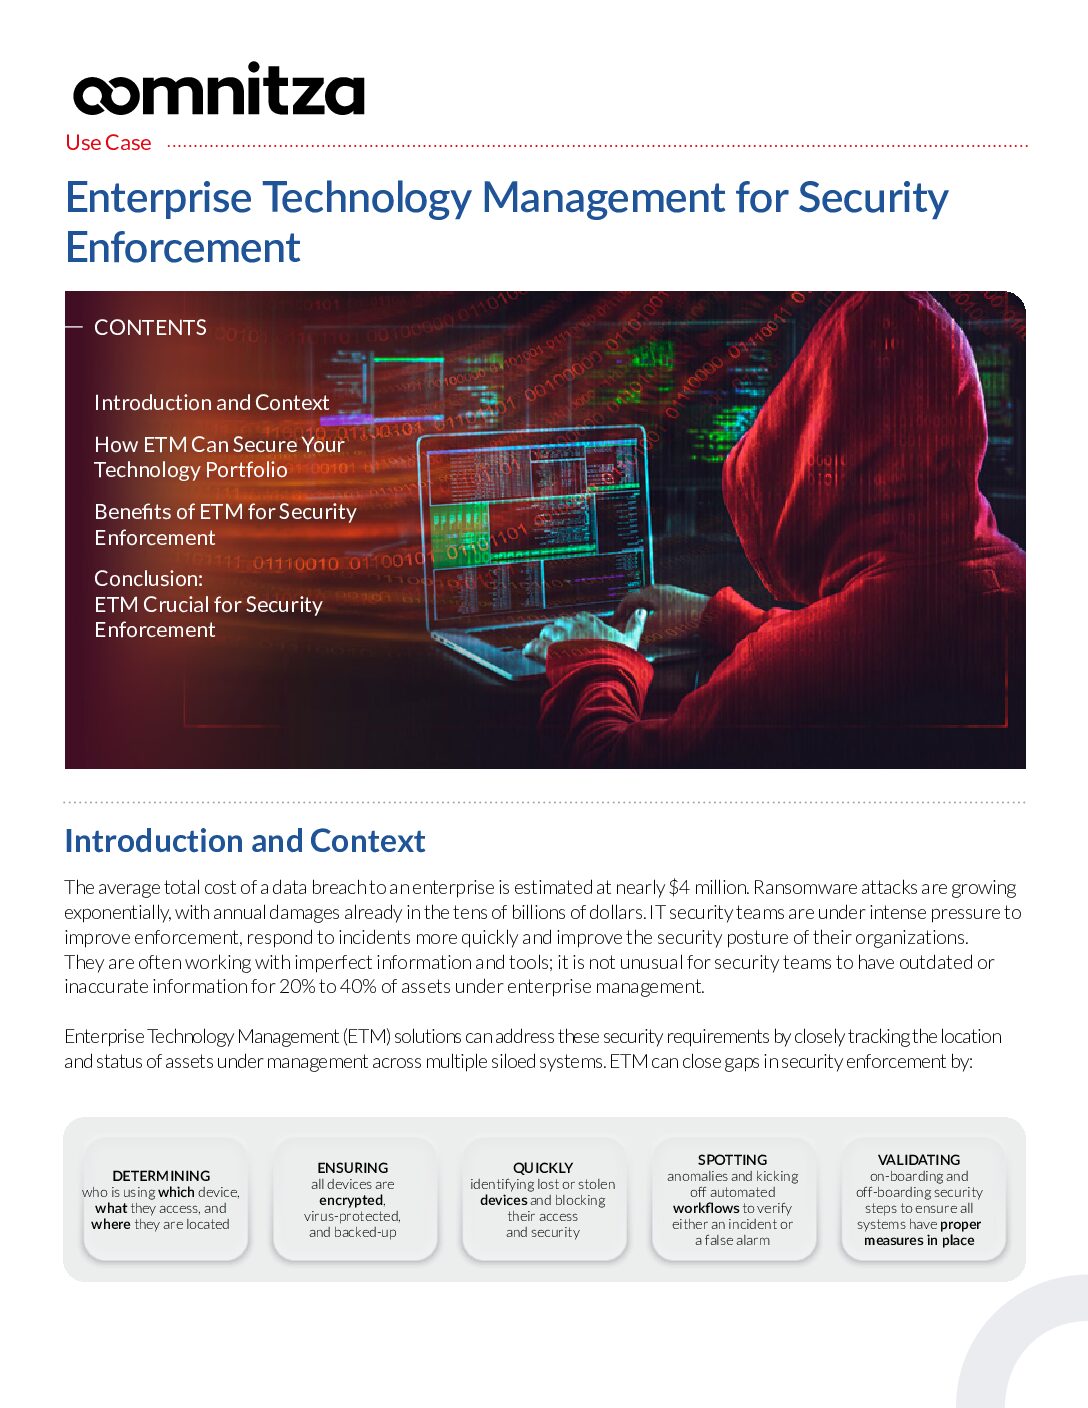 Featured image for Enterprise Technology Management for Security Enforcement Use Case